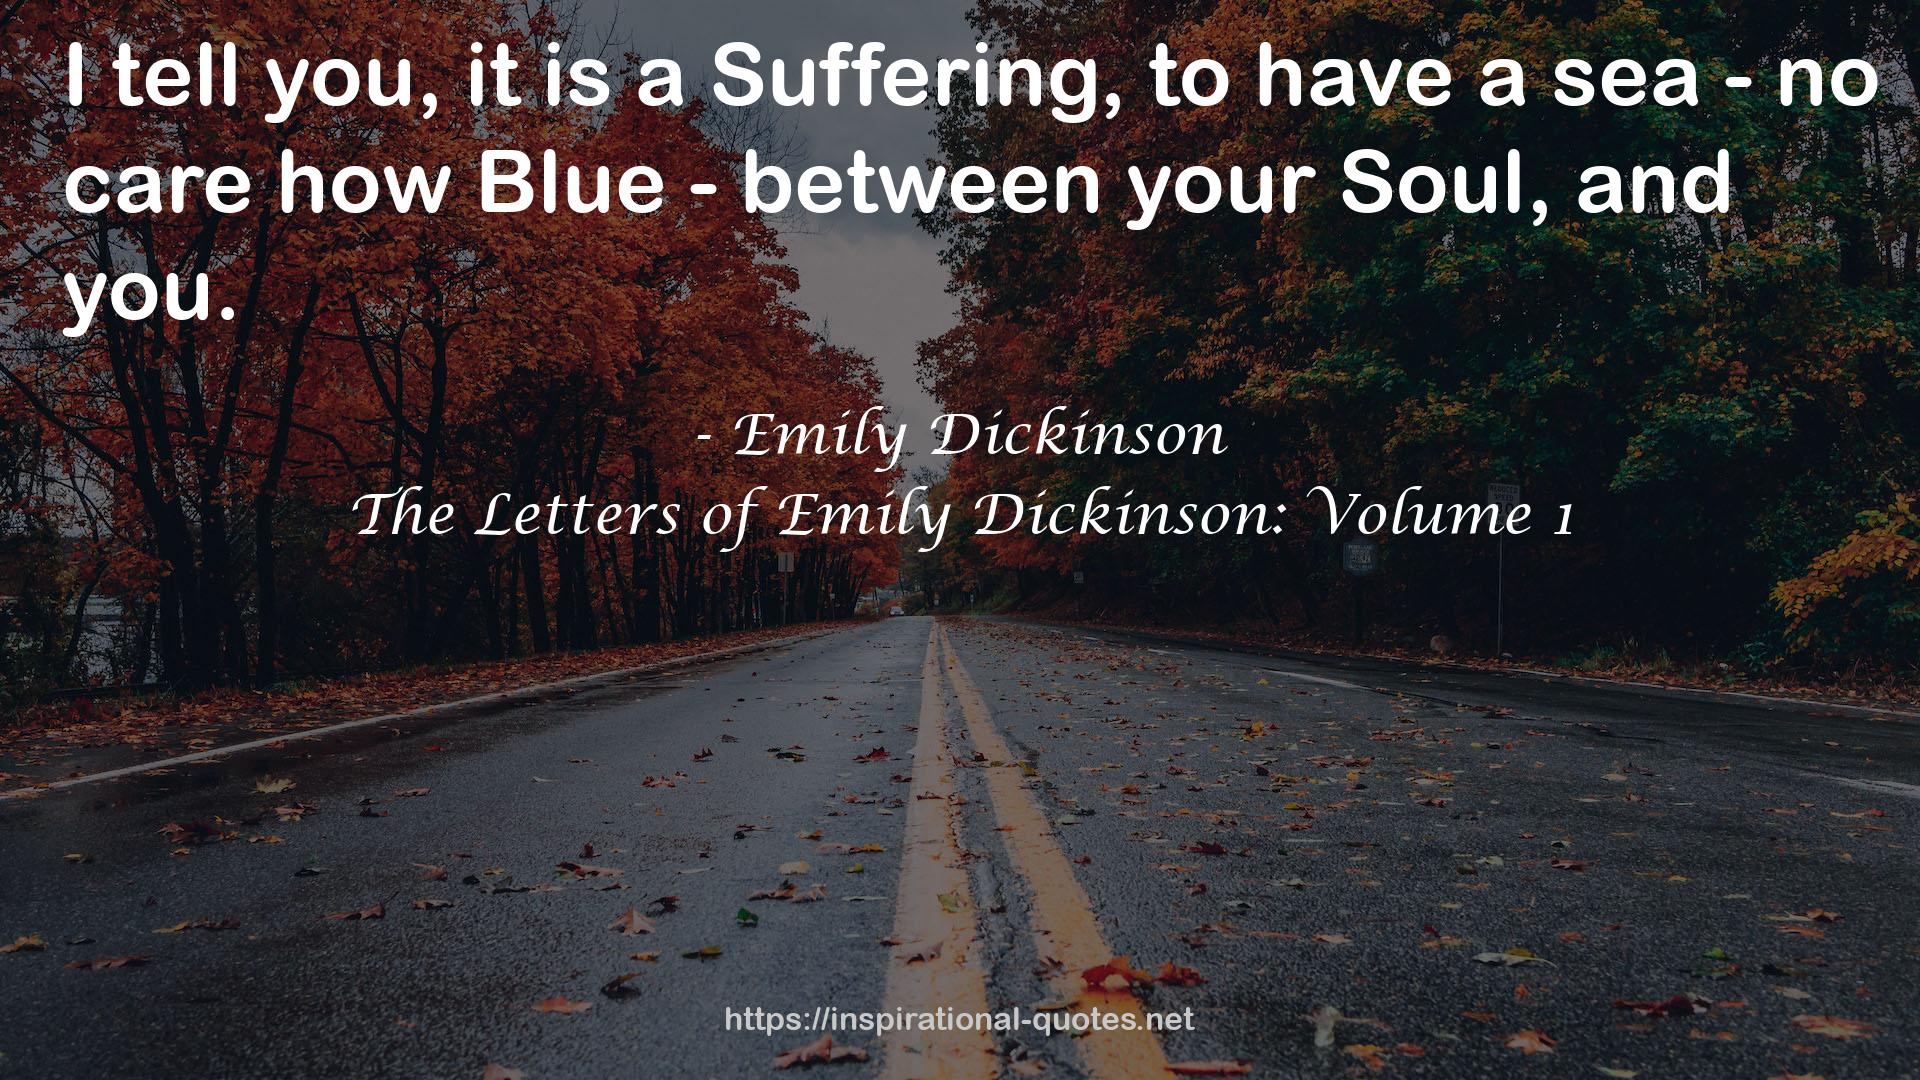 The Letters of Emily Dickinson: Volume 1 QUOTES